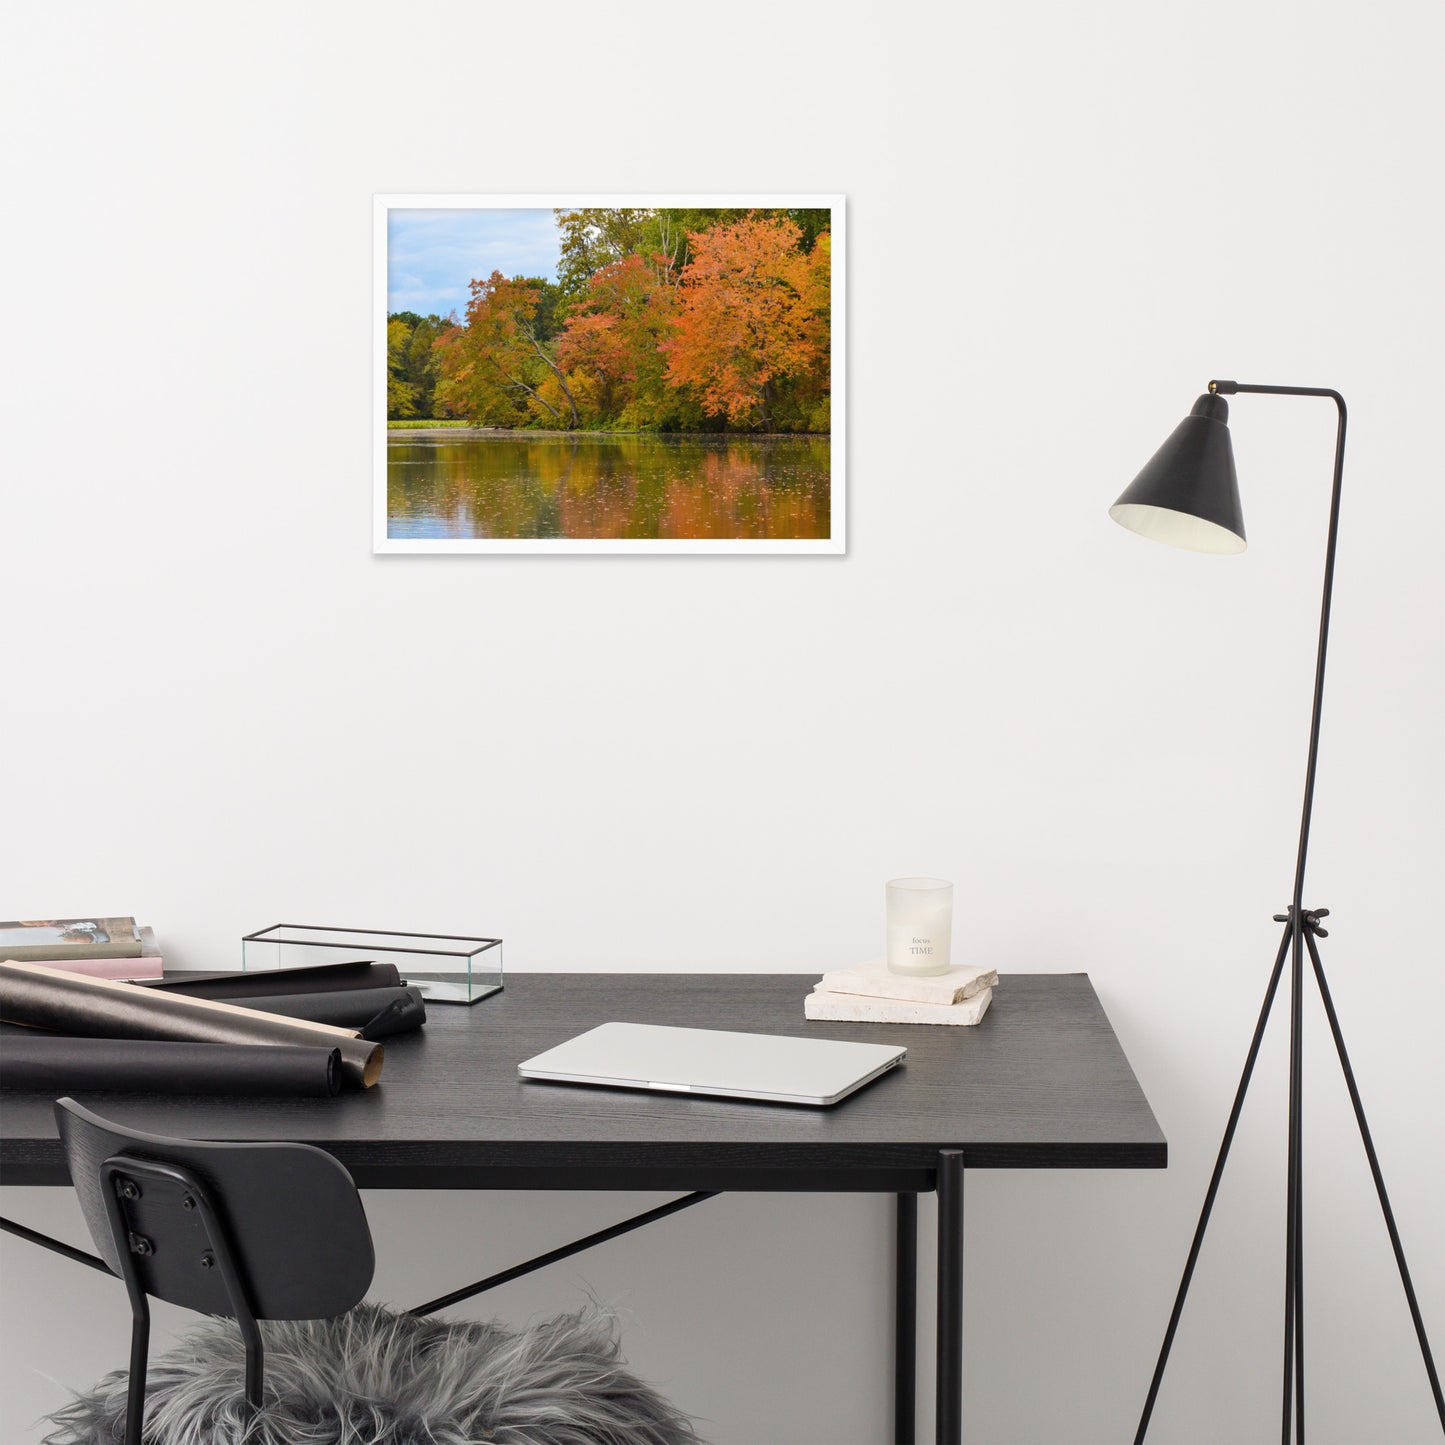 Rustic Framed Pictures: Autumn Tree Line - Rural / Country Style Landscape / Nature Photograph  Framed Wall Art Print - Wall Decor - Artwork